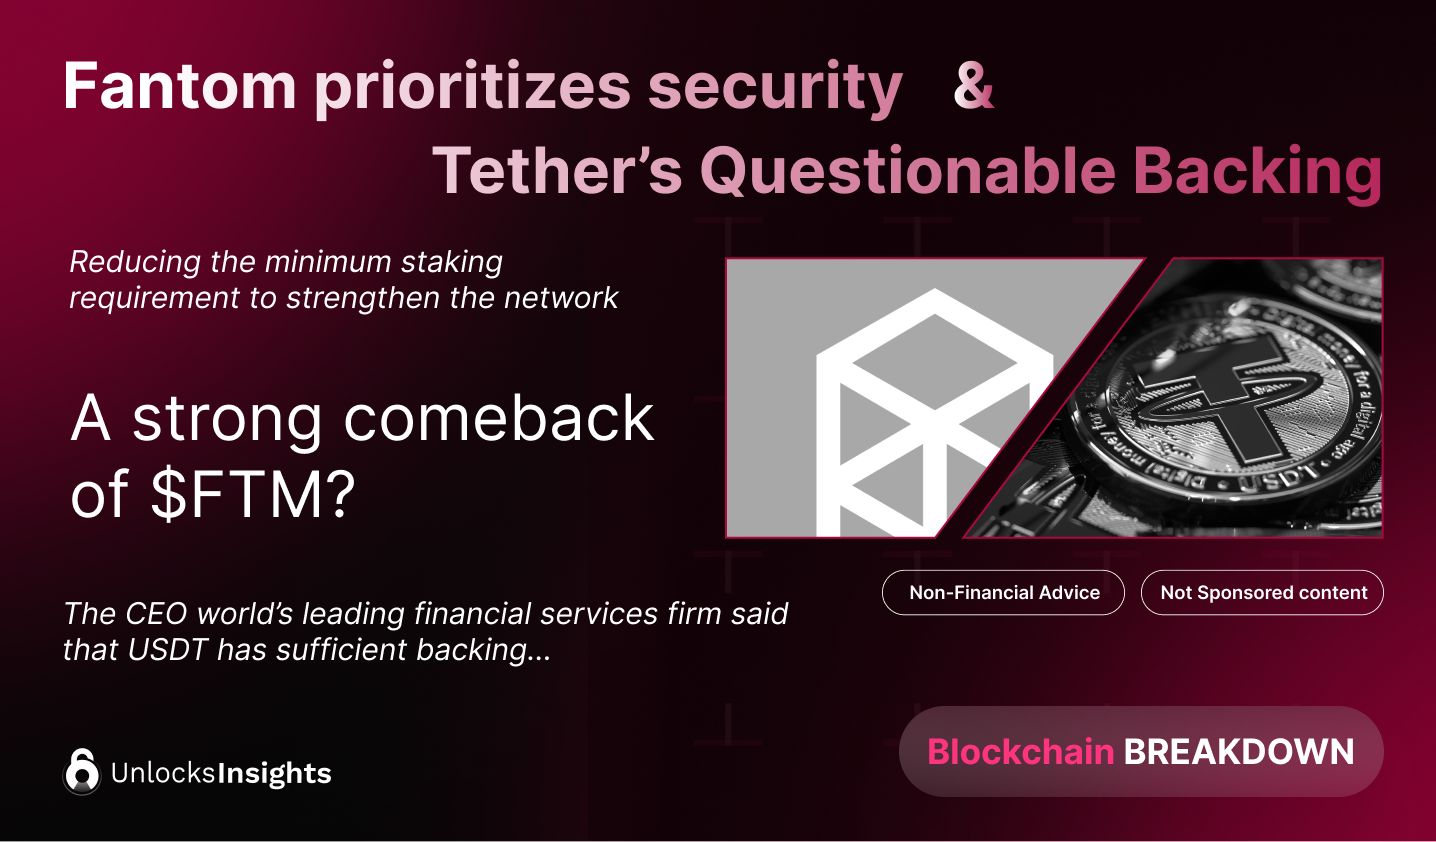 Fantom Prioritizes Security & Tether's Questionable Backing